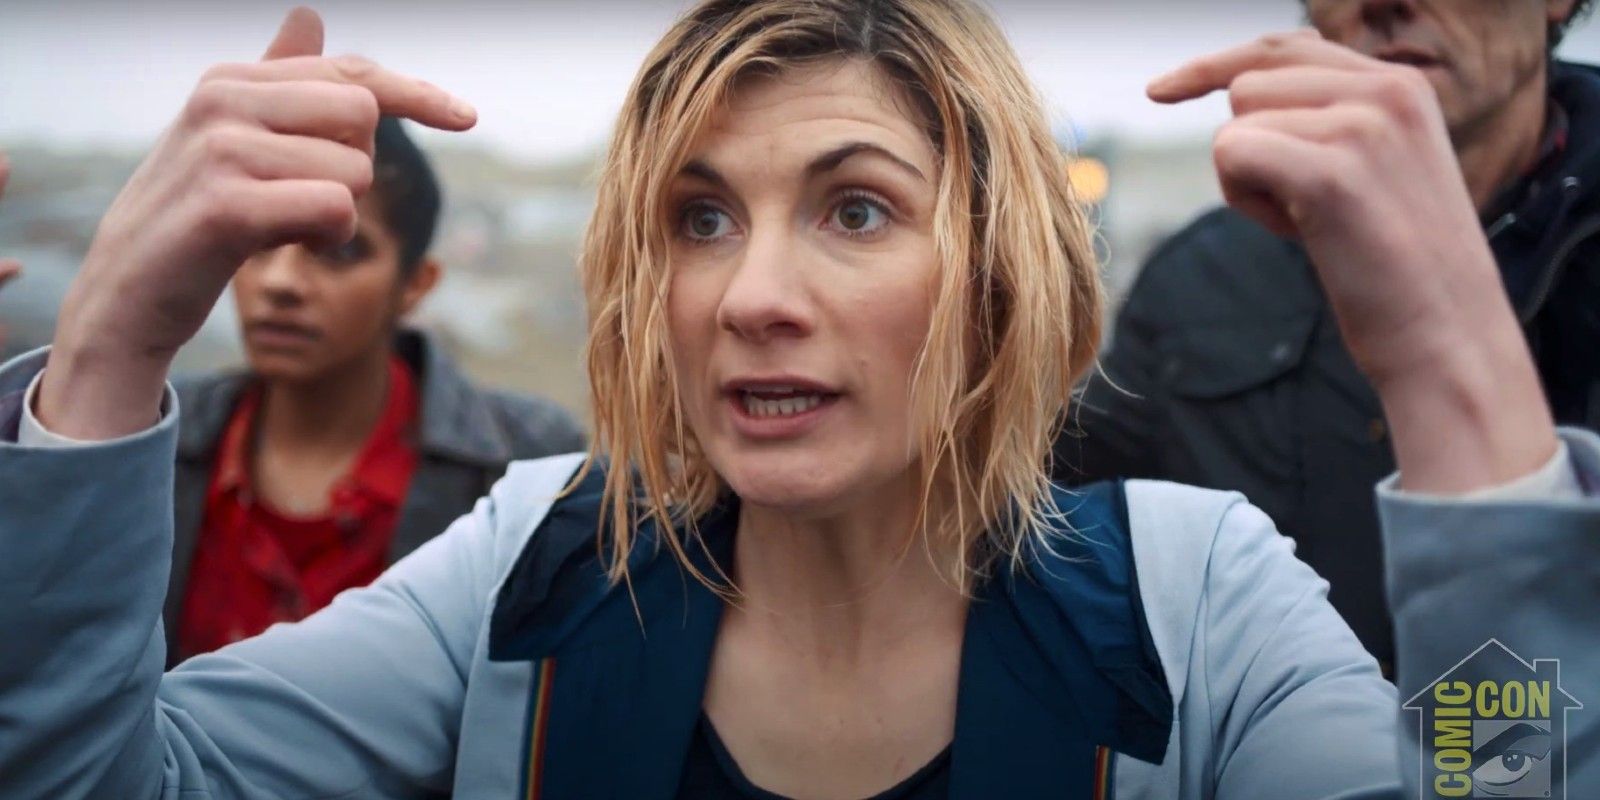 Jodie Whittaker as The Doctor in Doctor Who season 13